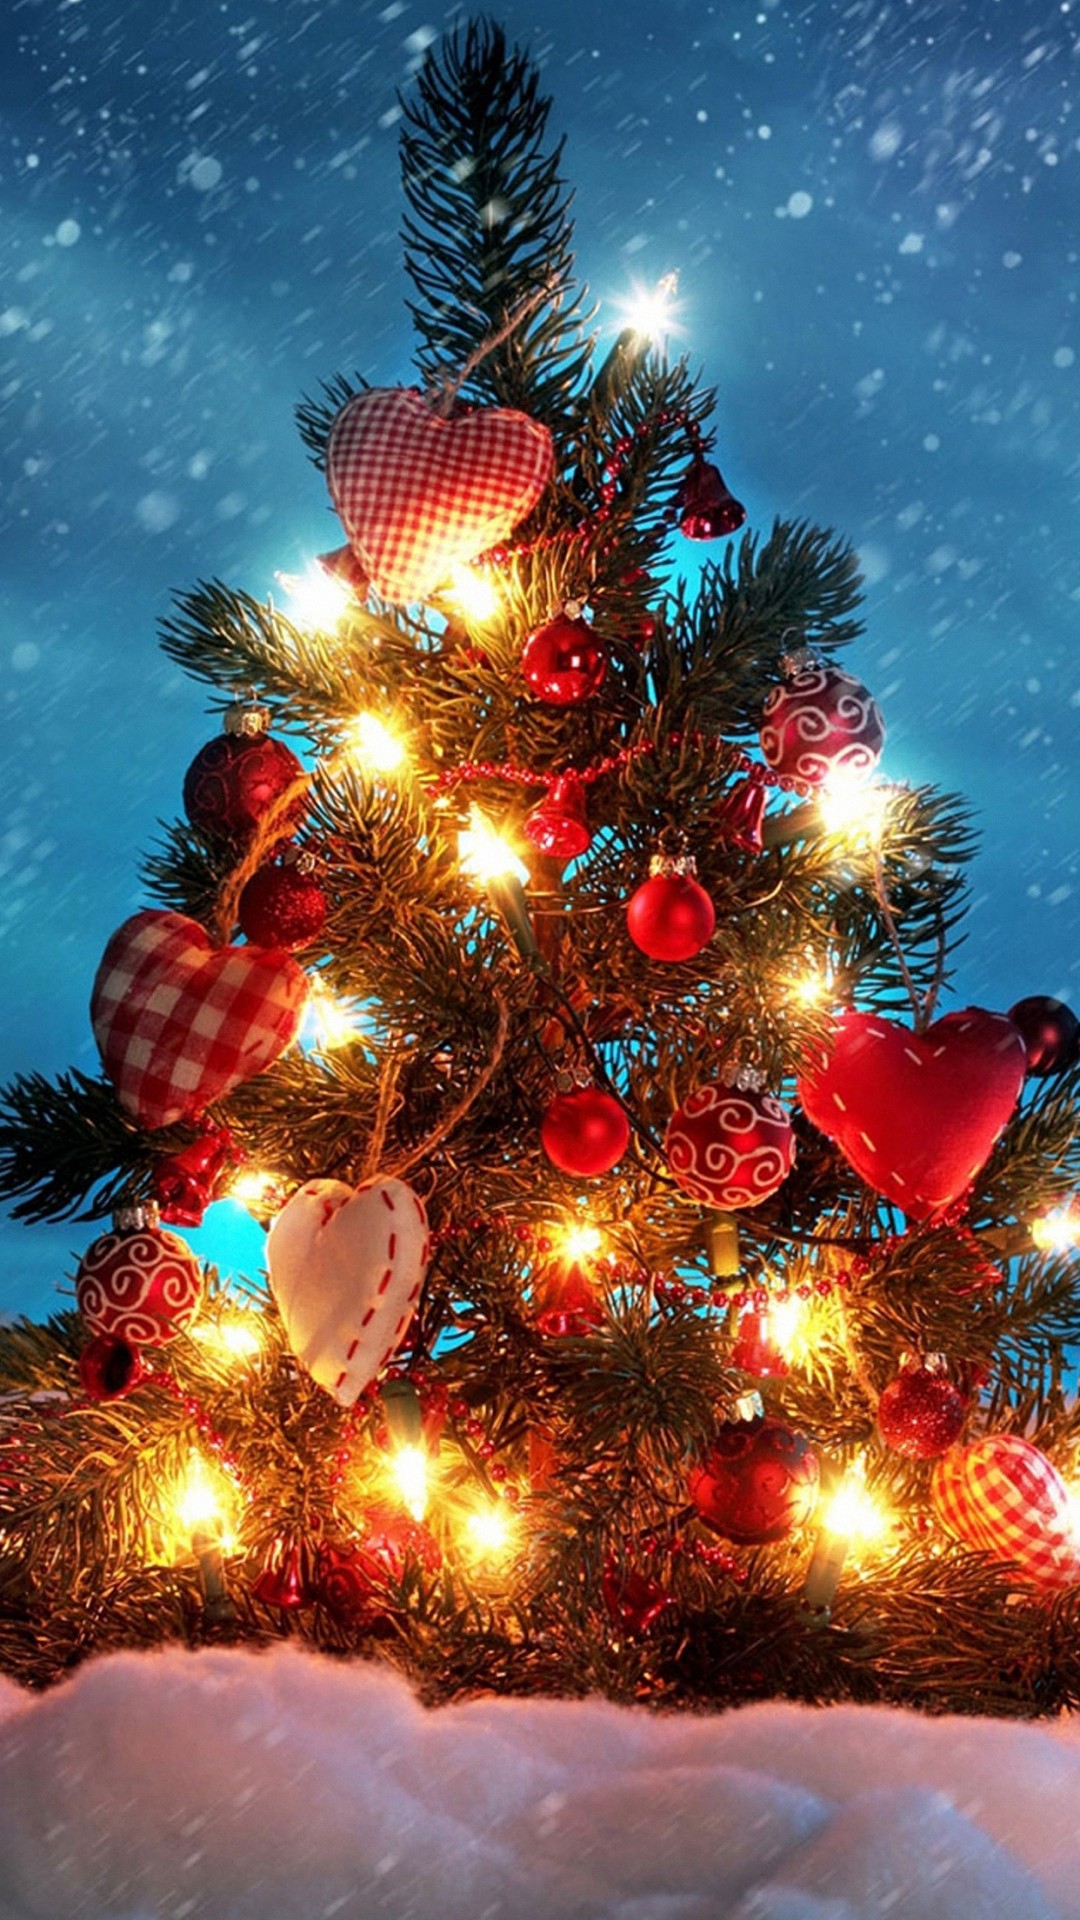 1080x1920 christmas tree heart love decorations iphone 6 wallpapers HD. Christmas  Wallpaper ...